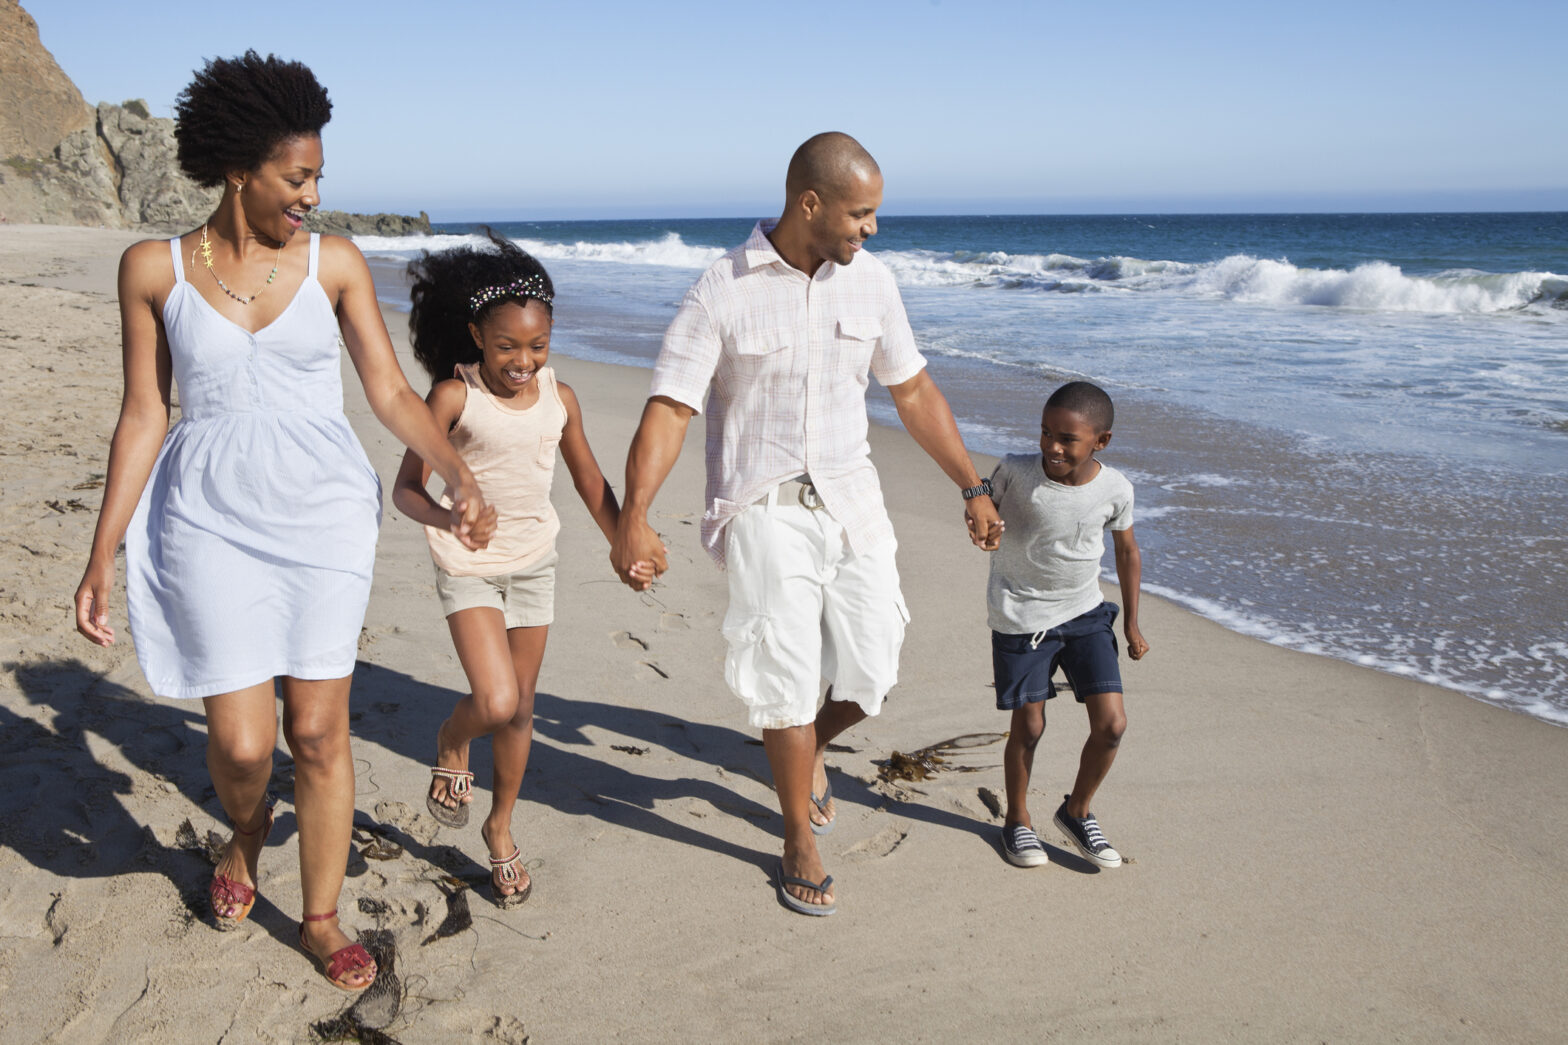 Familymoons are Trending, Here's What to Know